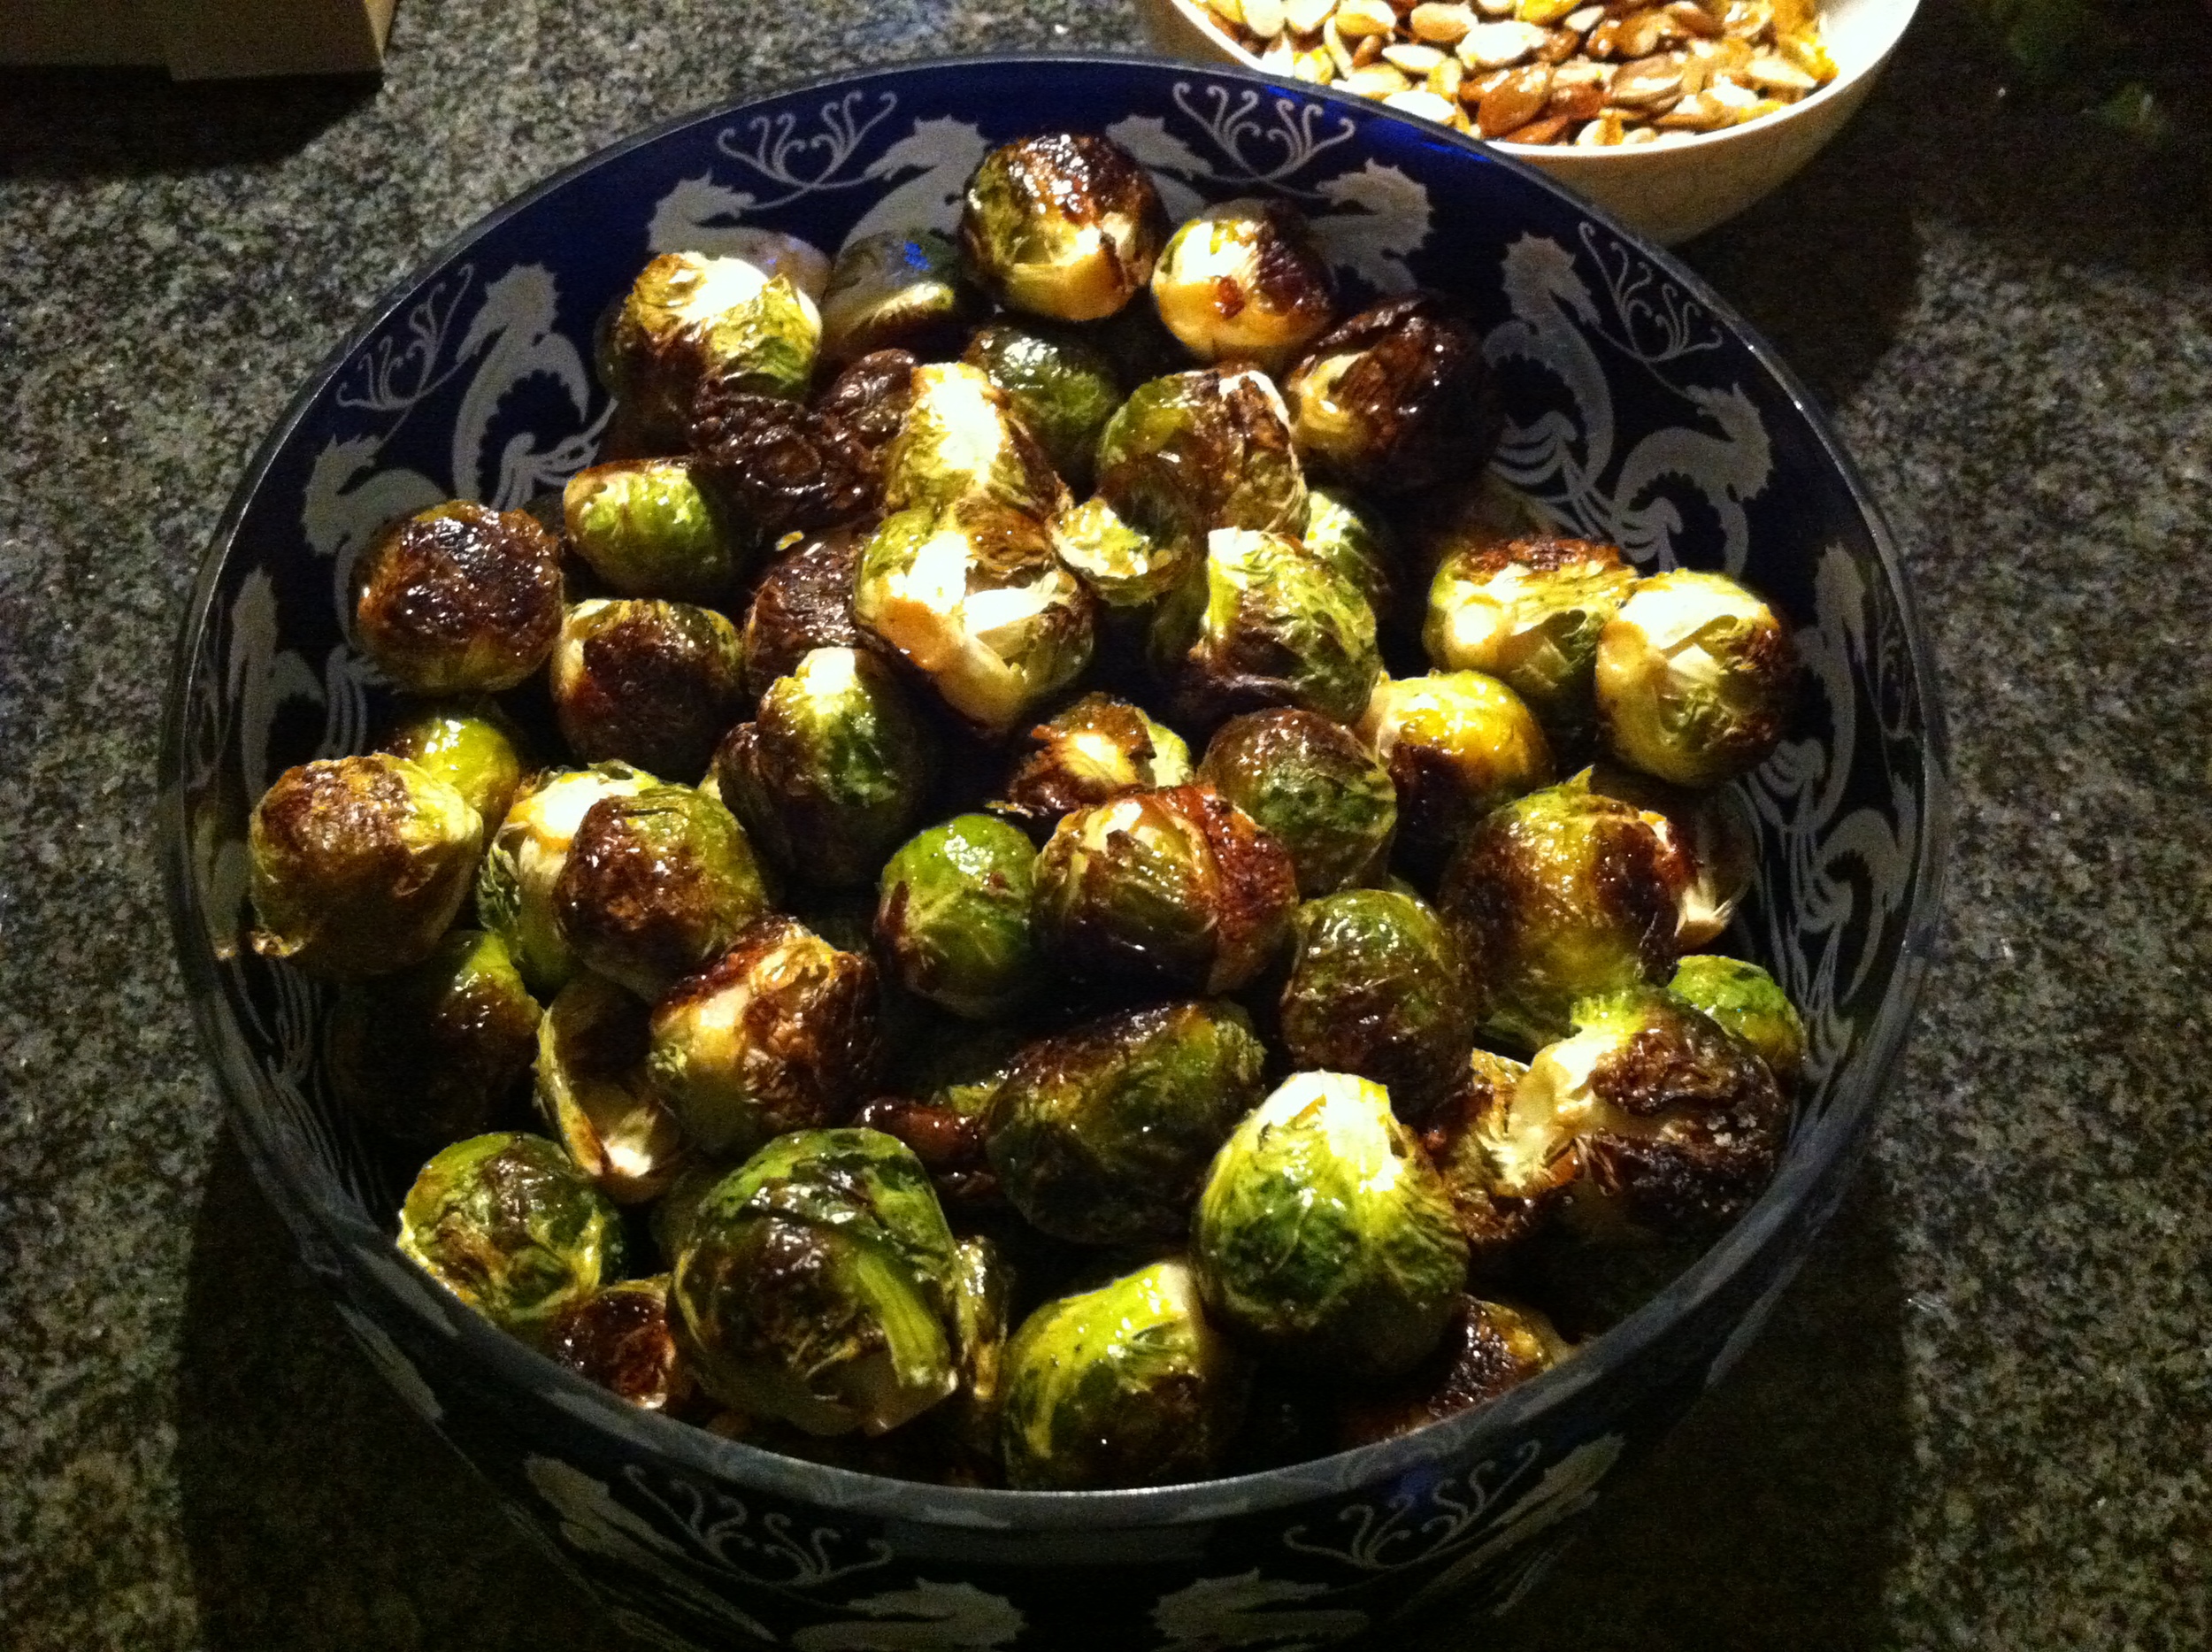 These brussels sprouts are supertasty and totally vegan.